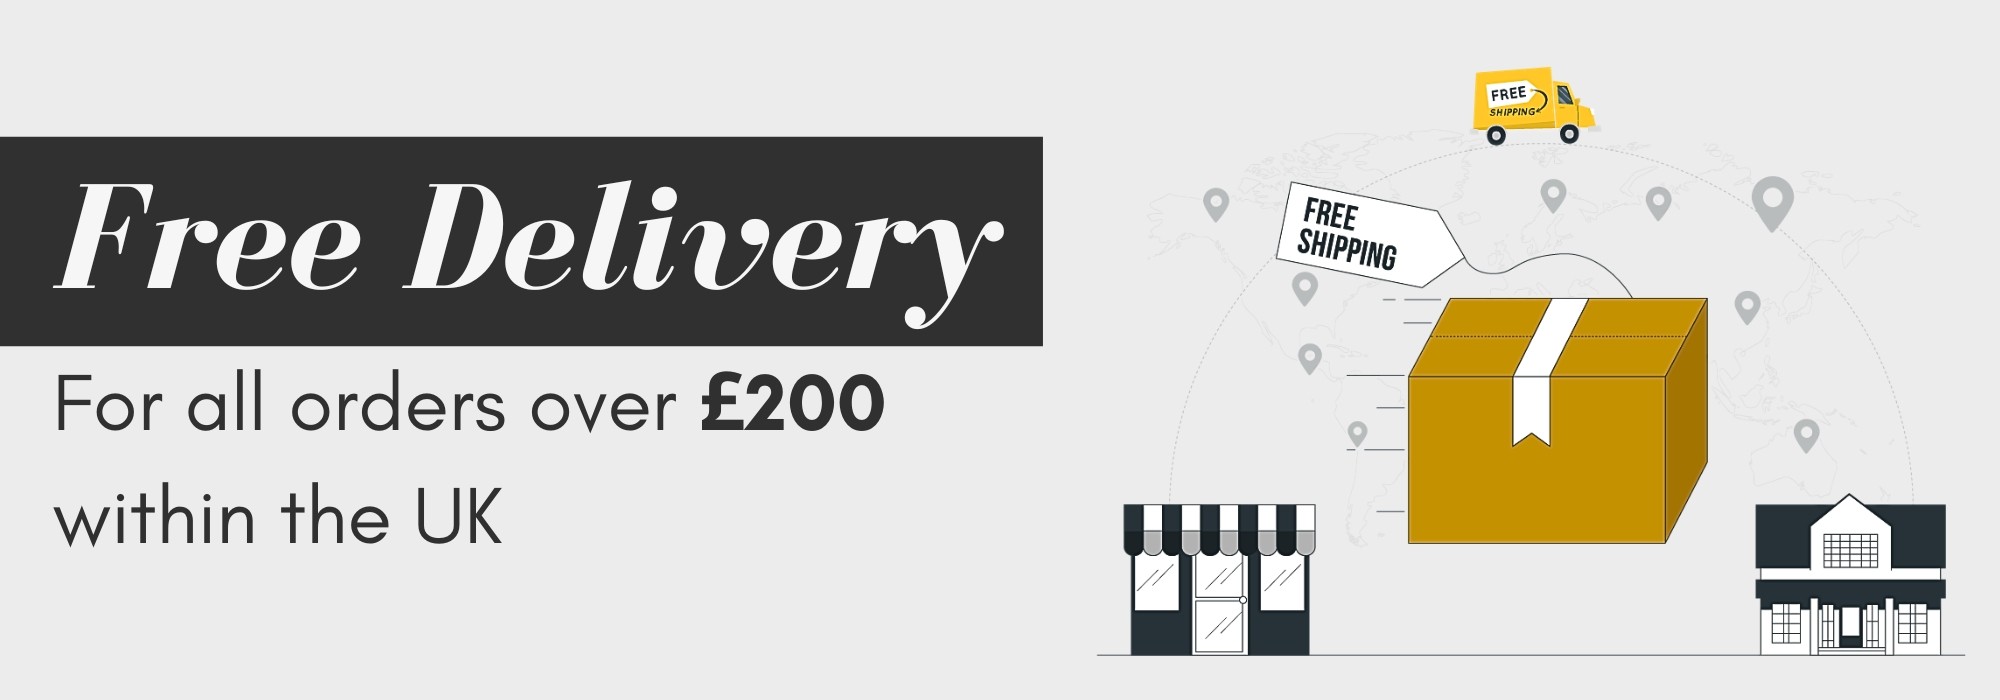 42_Free Delivery New.jpg